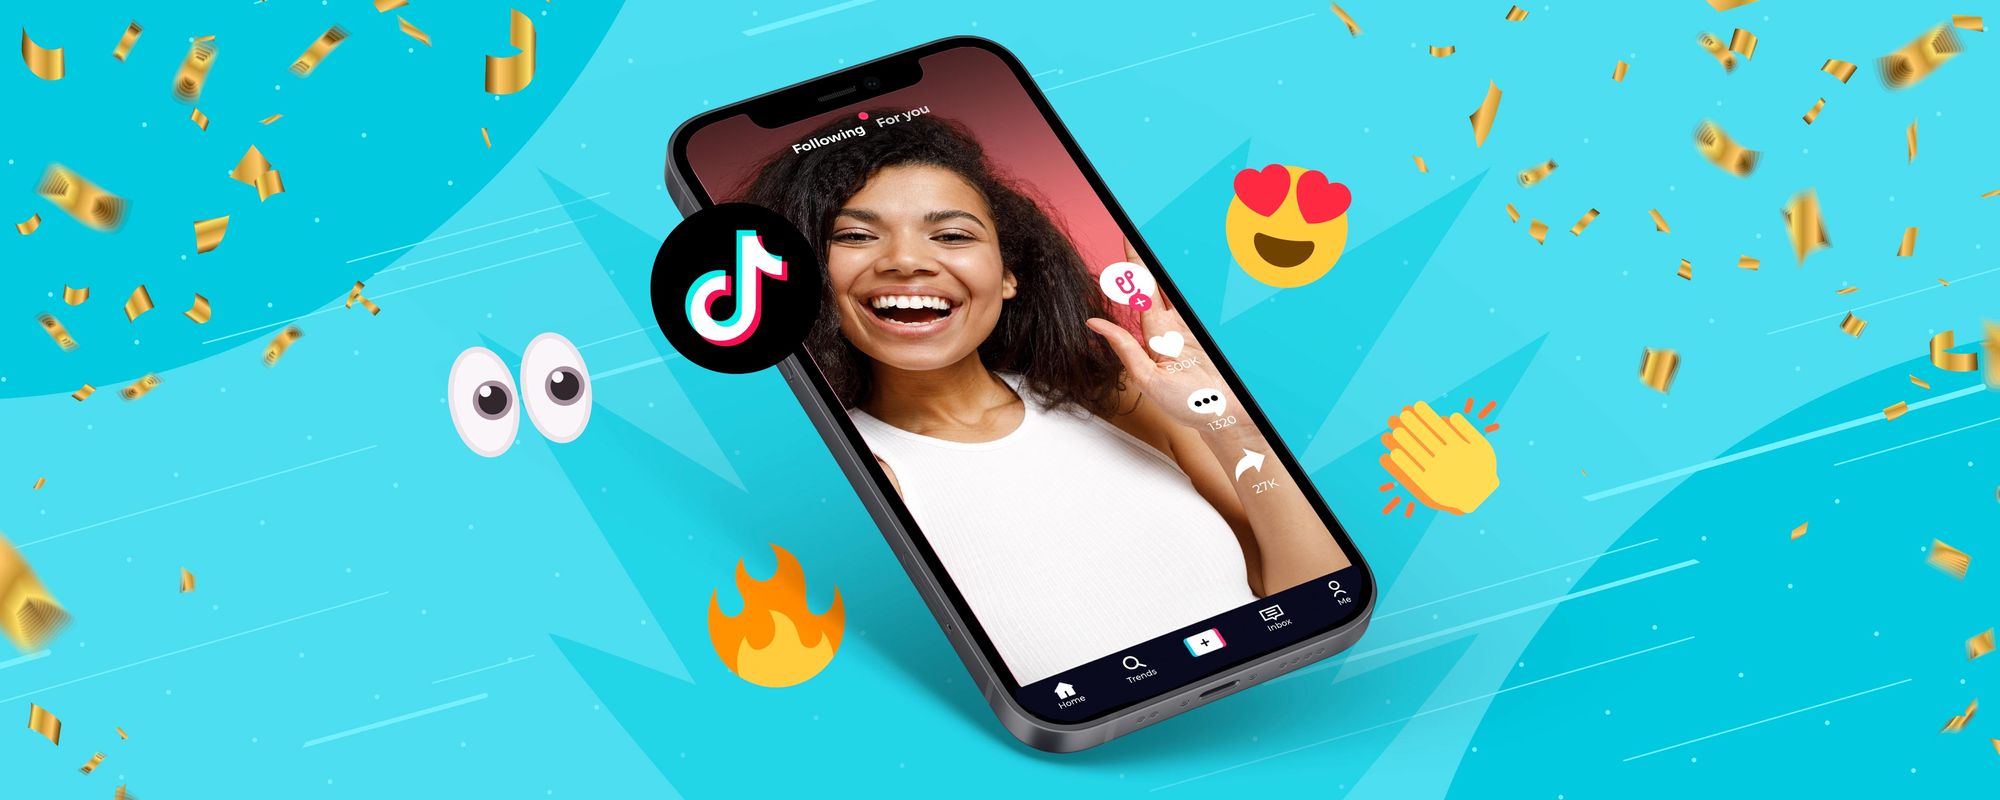 Image of a TikTok video with a selection of emojis that relate to views and people interacting with content.